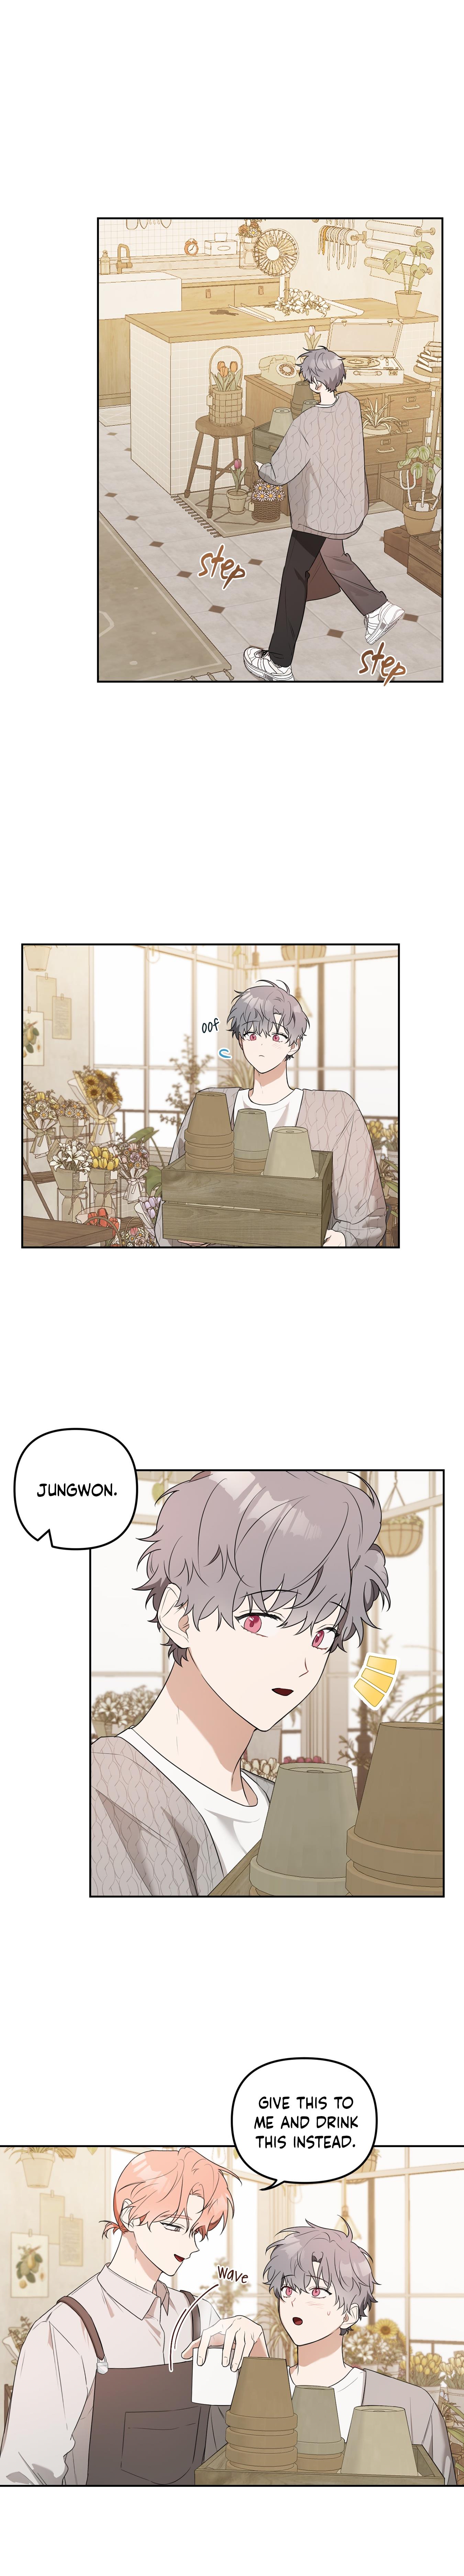 Jungwon’S Flowers - Page 2